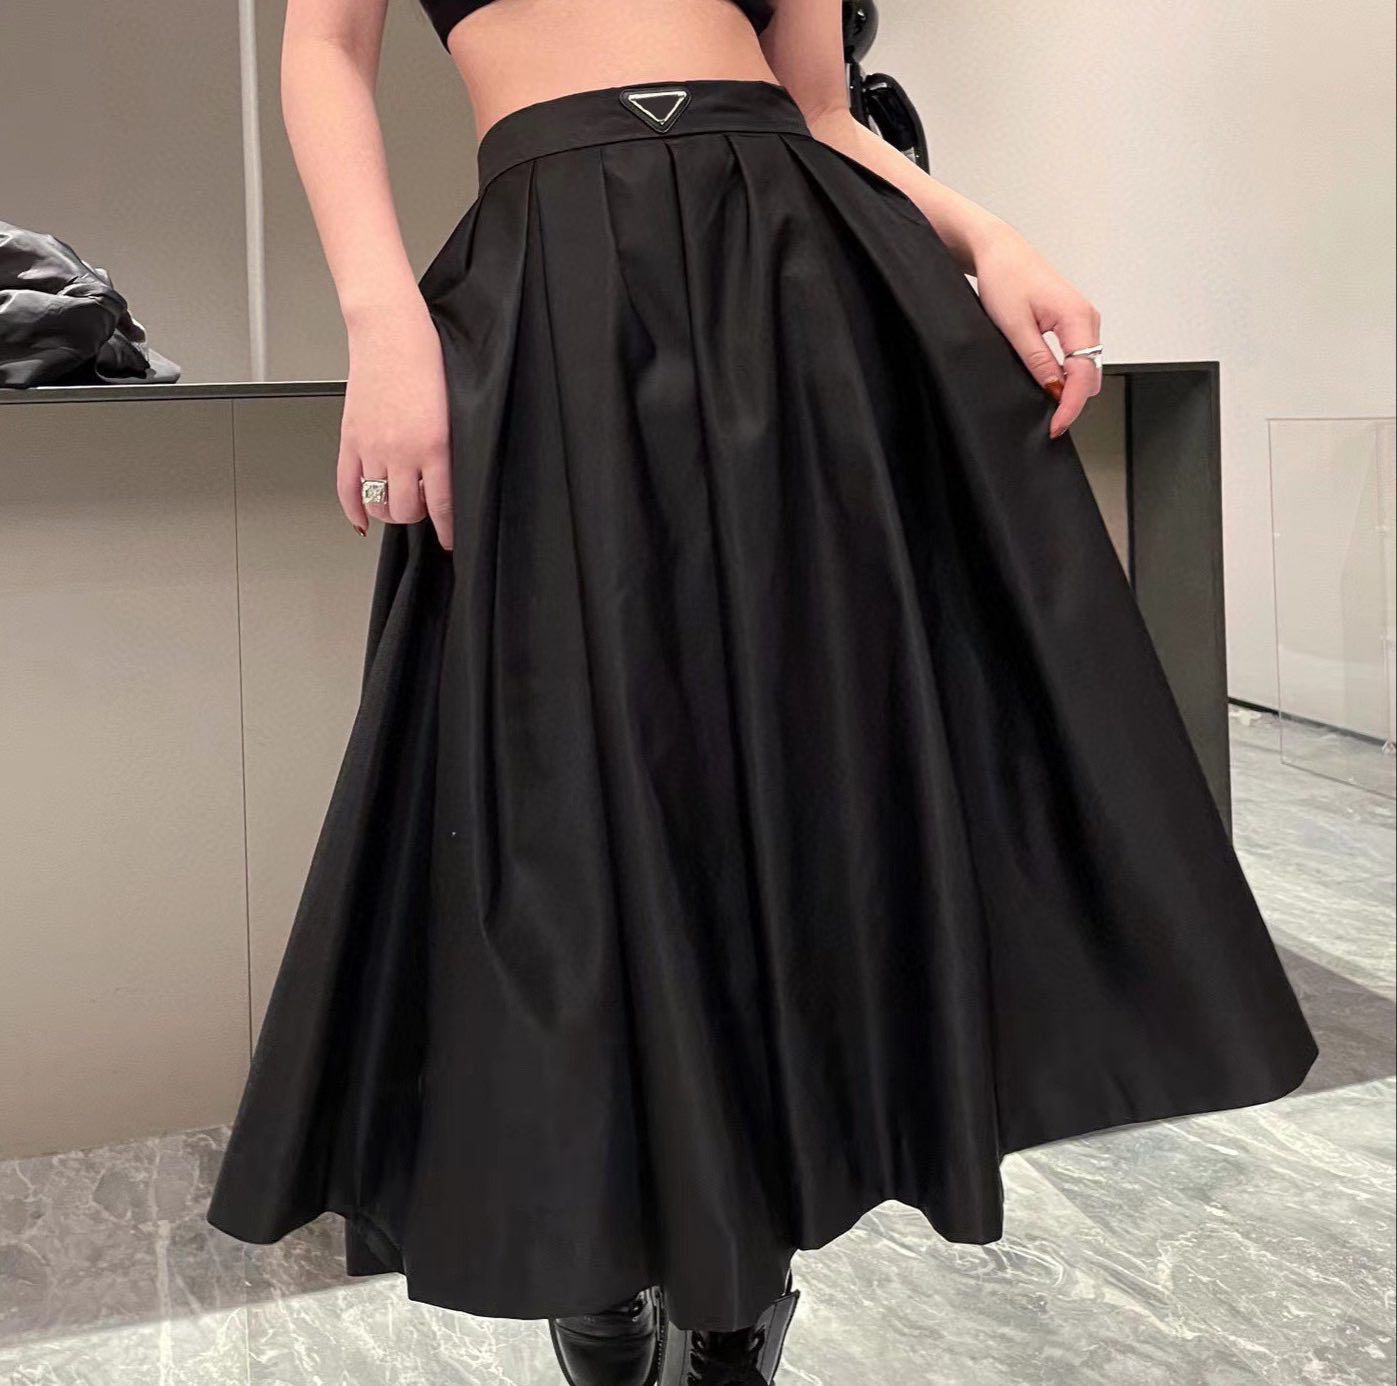 Designer Womens Dress Fashion Re Nylon Casual Dresses Summer Super Large  Skirt Show Thin Pants Party Skirts Black Womens Clothing Size From  Aihao1232021, $48.9